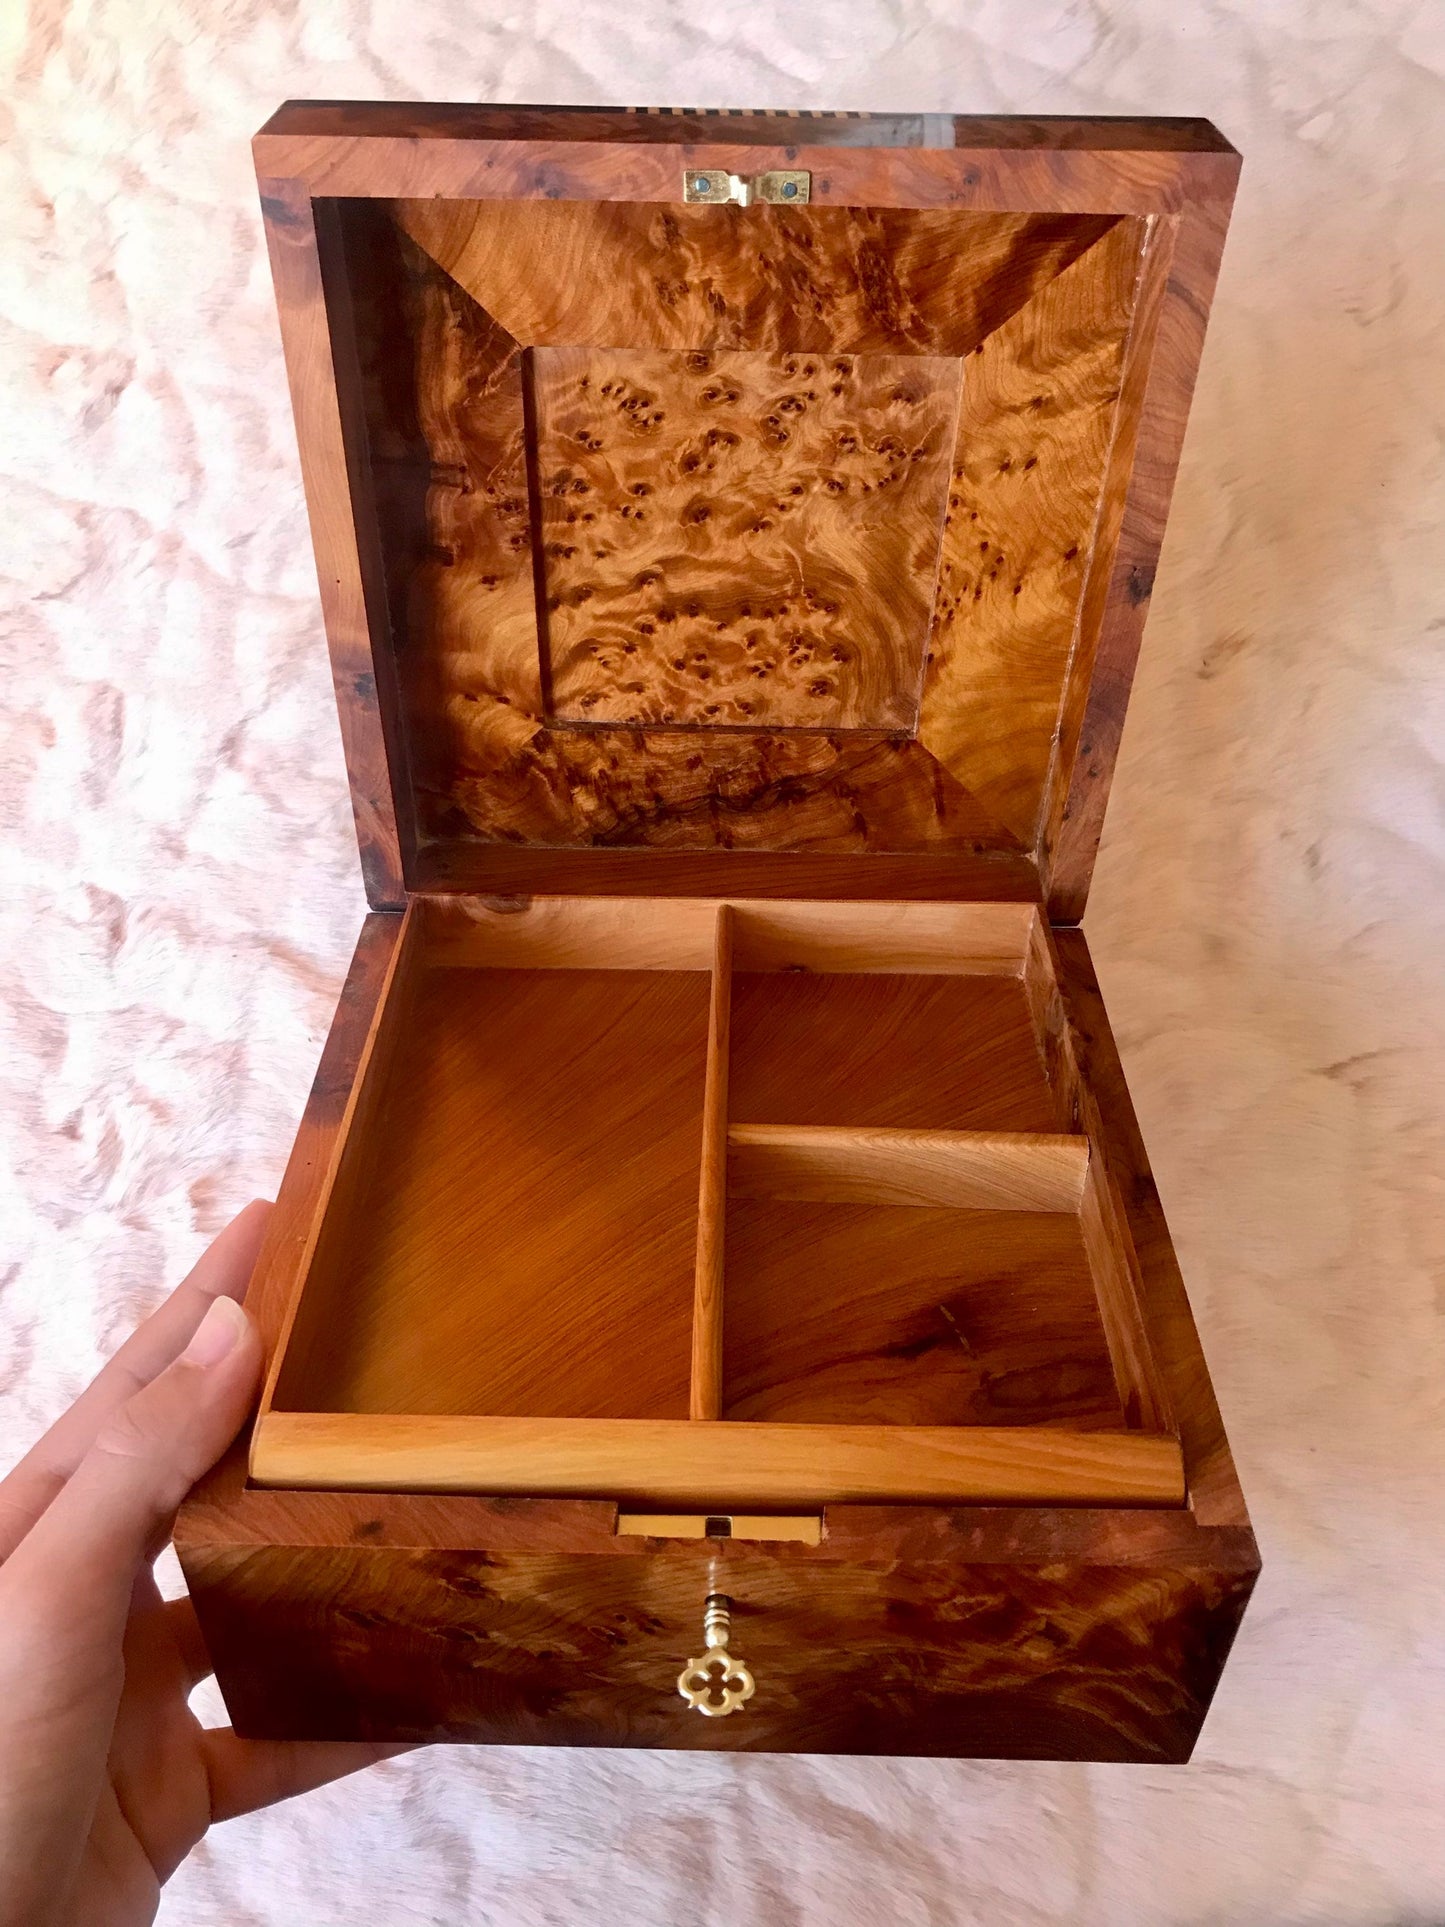 7"x7" Moroccan large lockable wooden jewelry Box organizer with key,engraved watch box,inlaid with Mother of Pearl,anniversary memory box